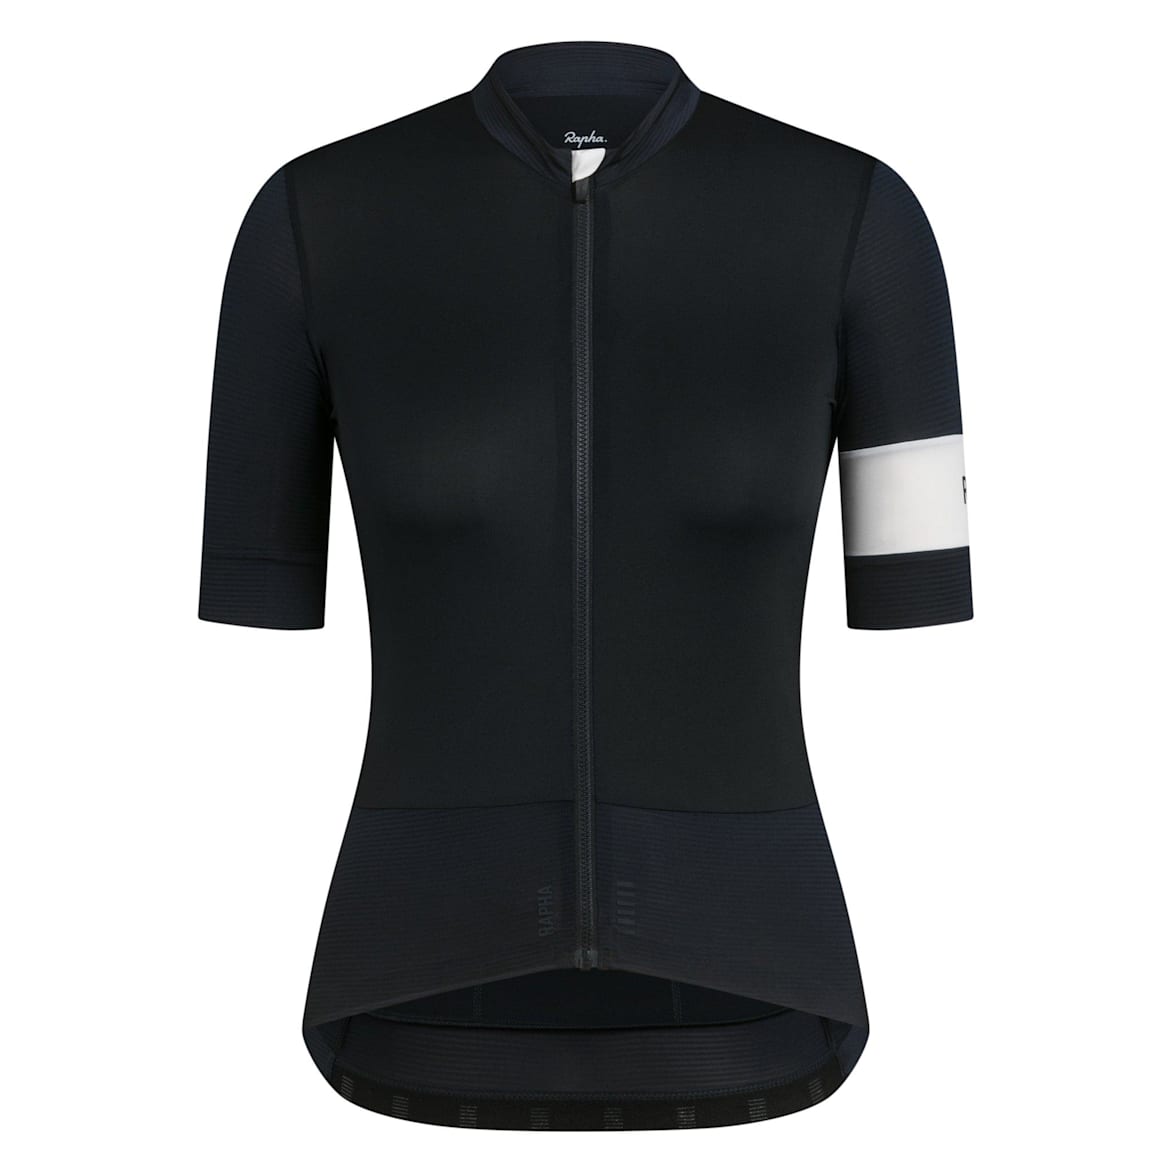 High Performance Cycling Clothing | Pro Team Collection | Rapha